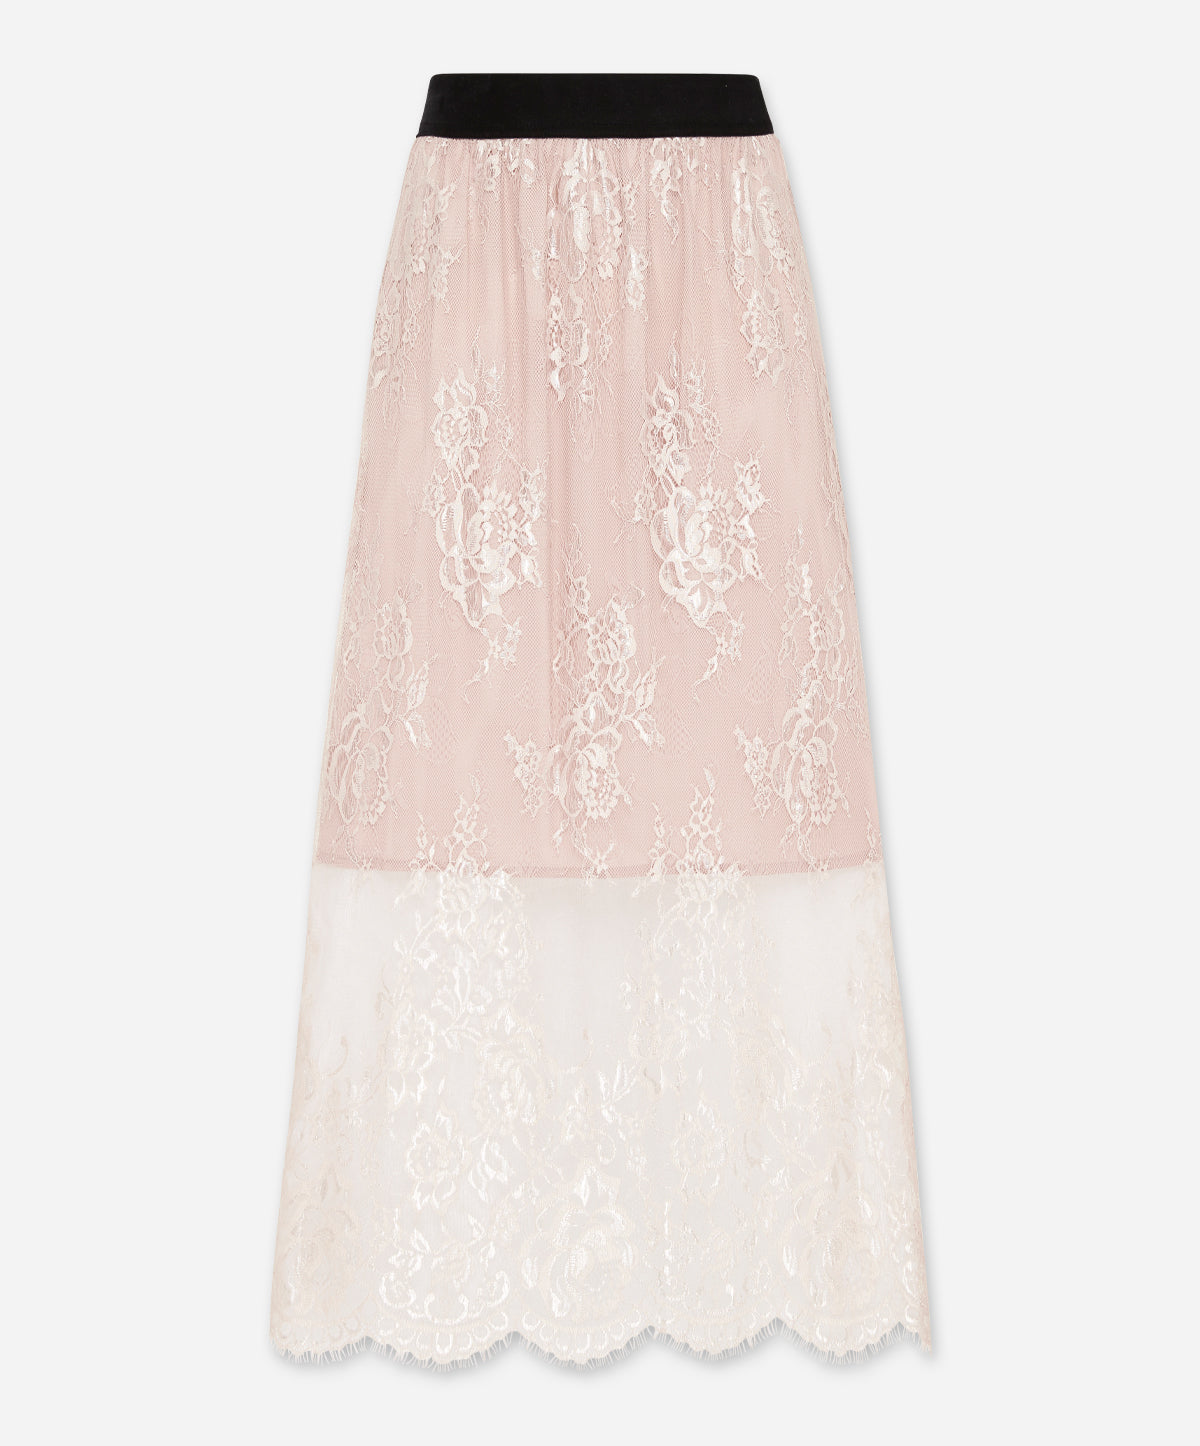 Rennes Lace Skirt